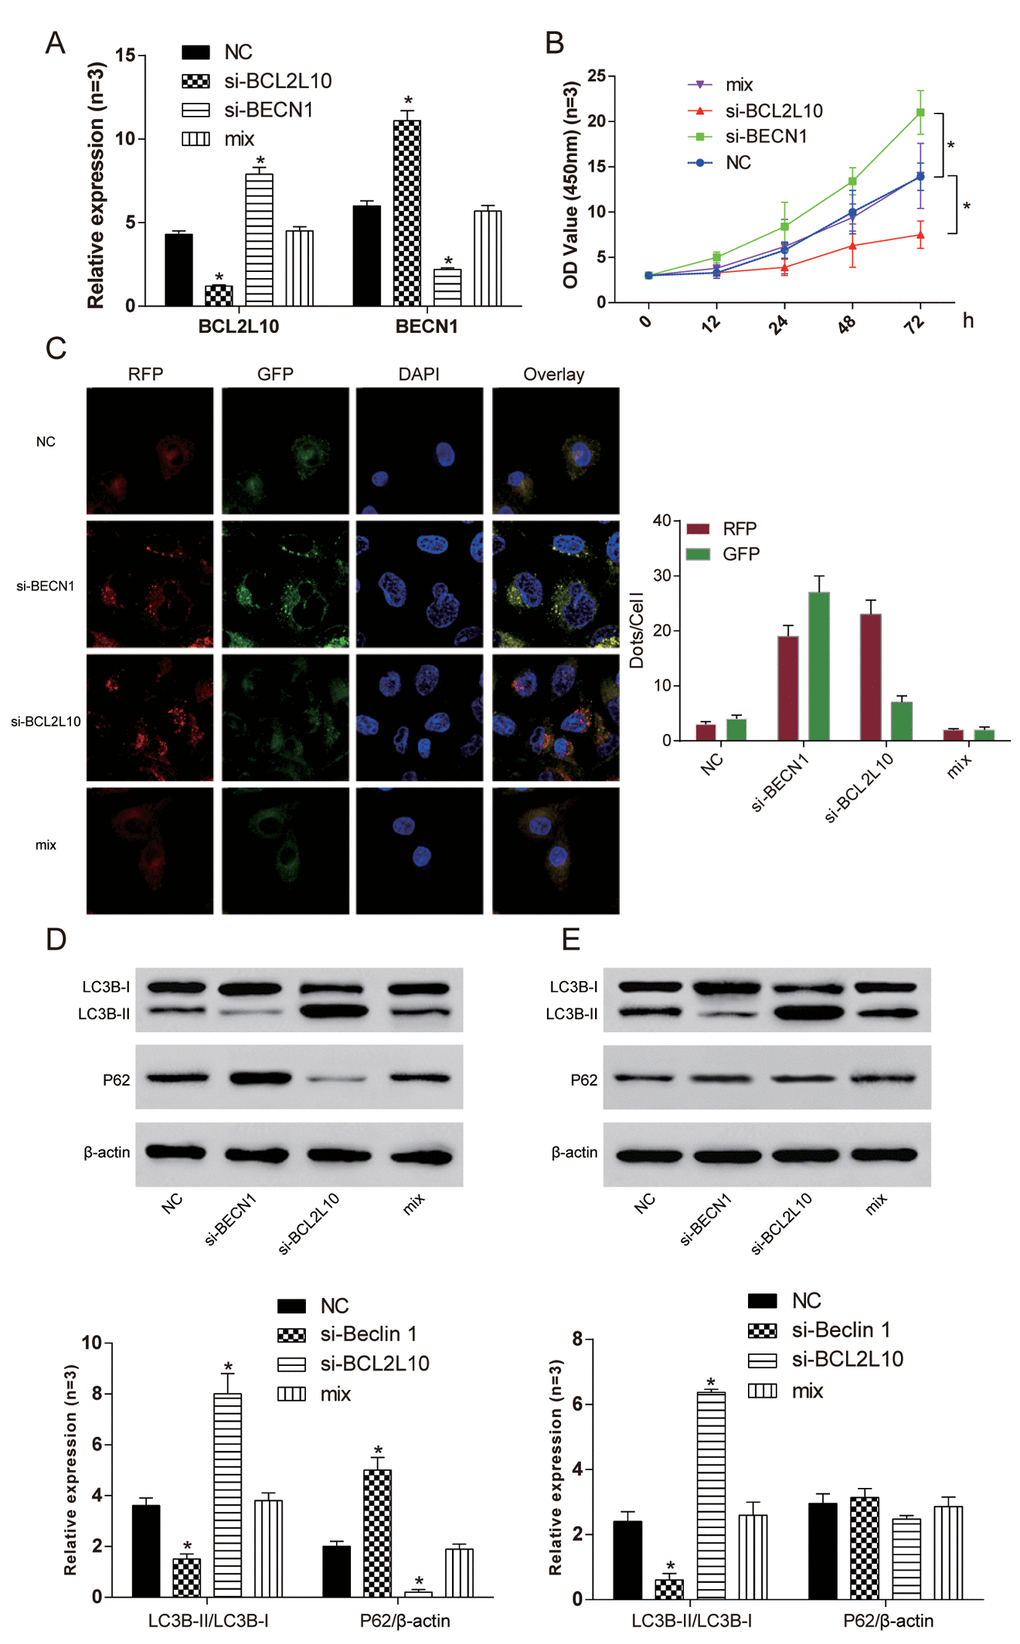 Si-BCL2L10 induced autophagy of Hep3Bcells by releasing BECN1. (A) The expression of BCL2L10 and BECN1 after transfection in four different groups was detected by qRT-PCR. (B) The cell viability of si-BCL2L10 group was the weakest, while the cell viability of si-BECN1 group was the strongest. (C) Decrease of BECN1 could inhibit autophagic flux in HCC cells according to mRFP-GFP-LC3 assay. (D) The expression of LC3B-II/LC3B-I in si-BECN1 group was decreased while the expression of LC3B-II/LC3B-I in si-BCL2L10 group was increased. (E) Accumulation of LC3B-II was observed in the presence of Bafilomycin A1 in Hep3B cells. At the same time, knockout of BECN1 could not induced autophagic P62 degradation. * P 